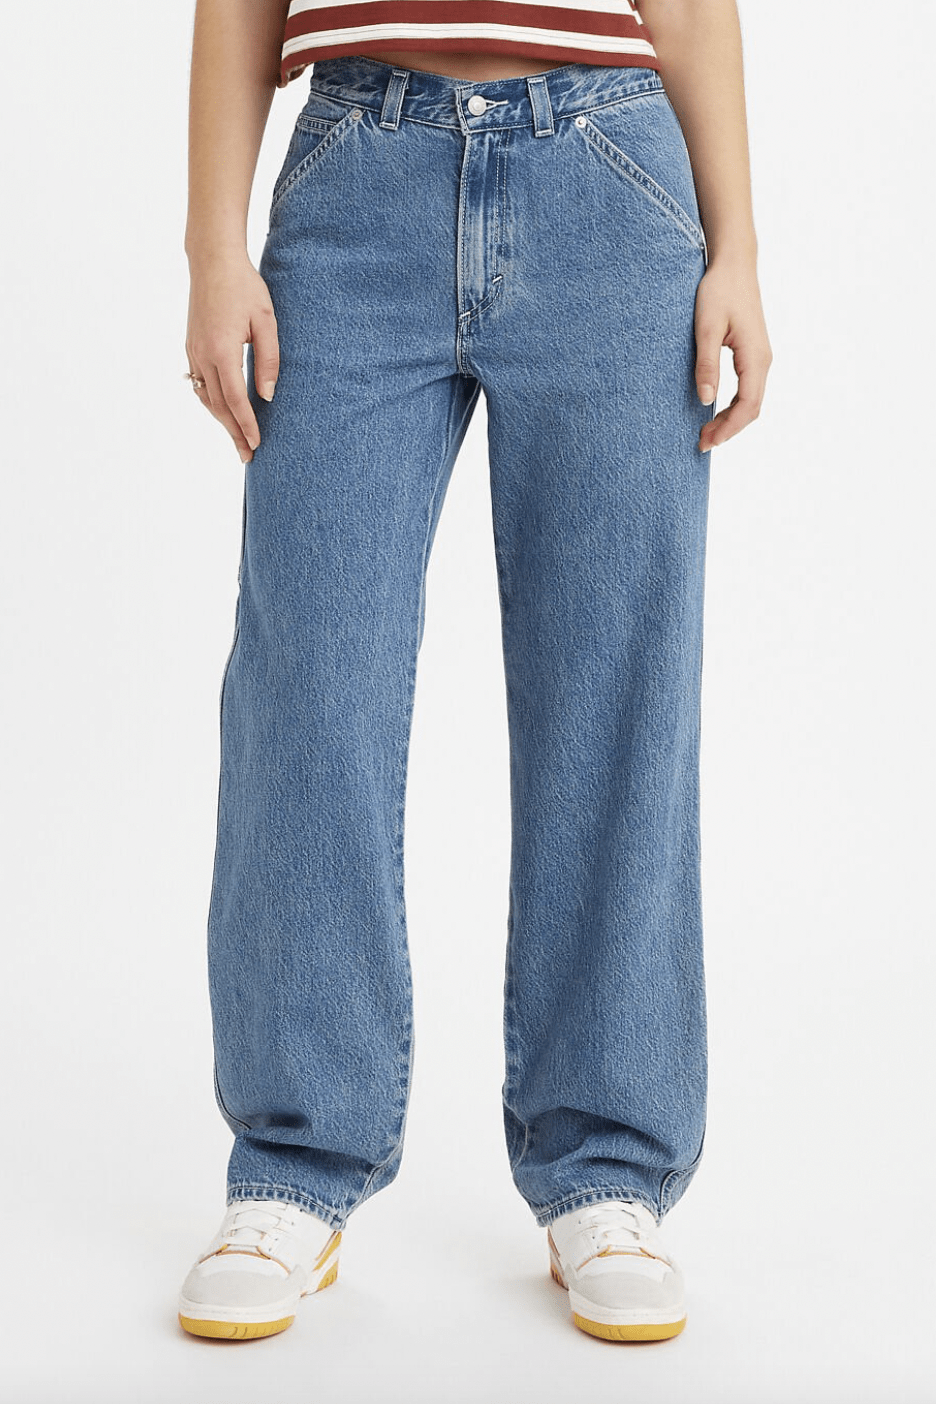 LEVI'S UTILITY DAD BAGGY JEANS - GOLLY GEE – Pretty Rad Store